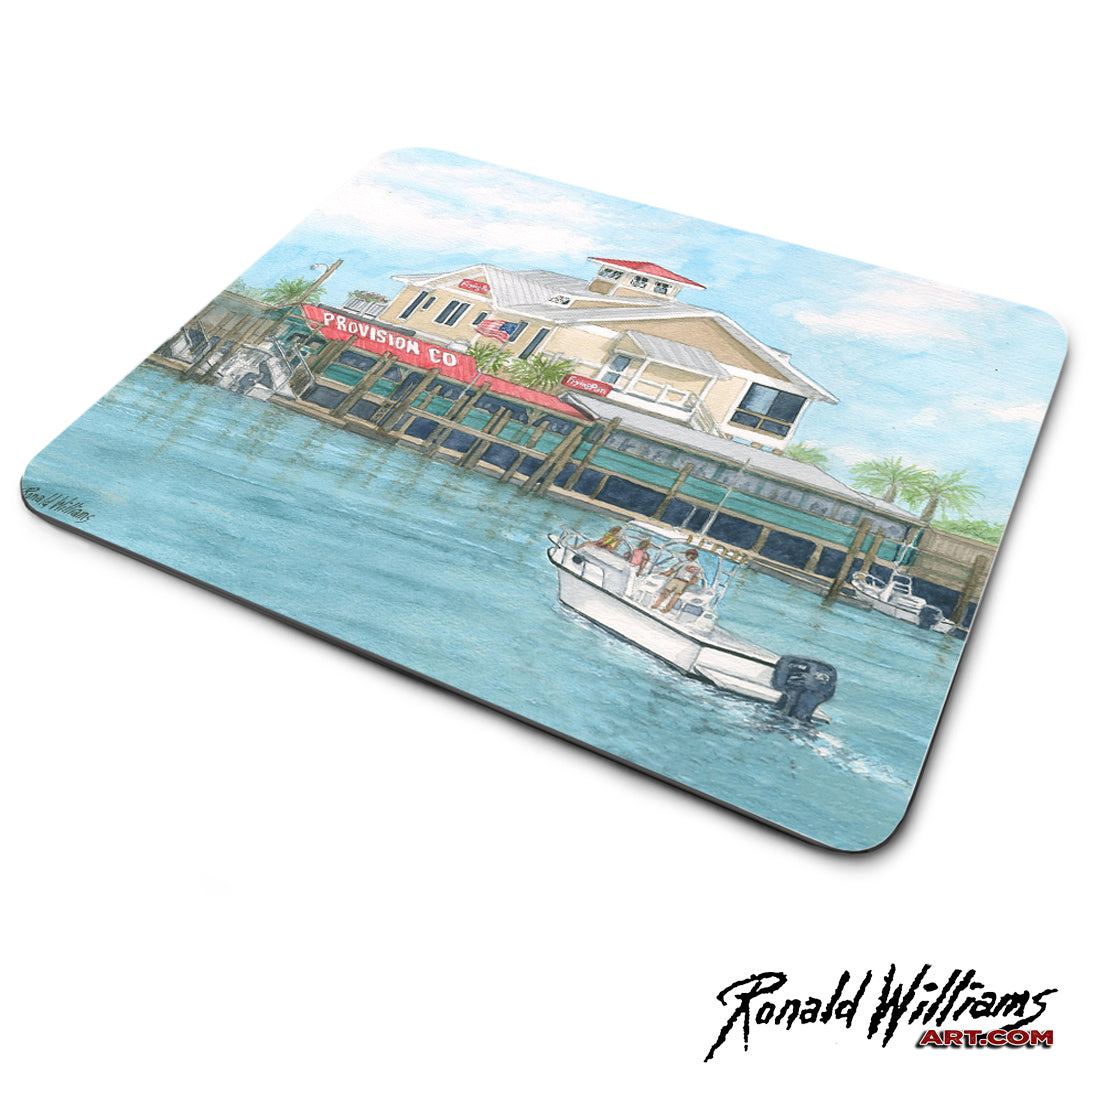 Mouse Pad - Frying Pan Restaurant Provision Company Southport NC